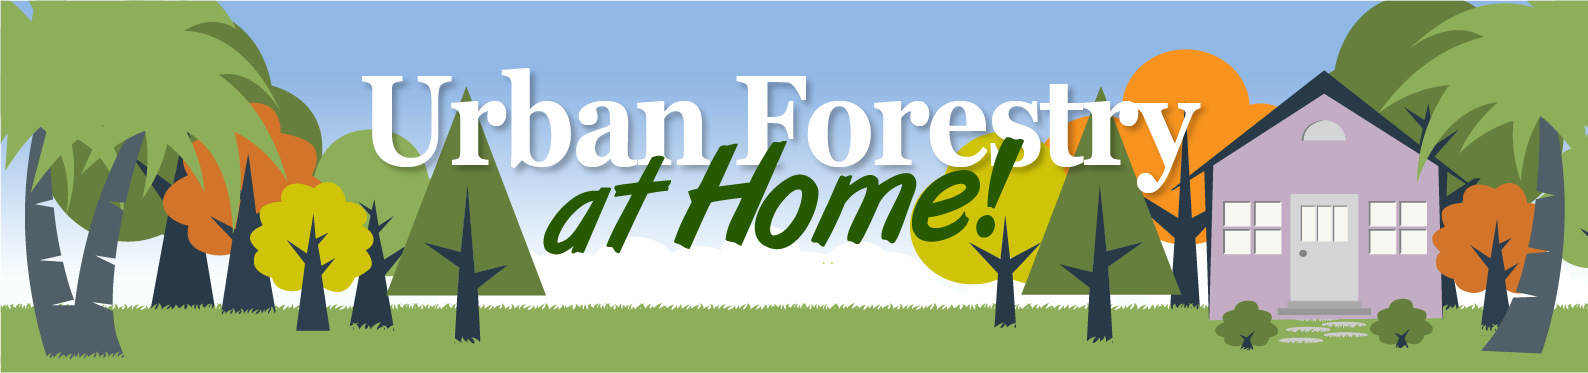 Urban Forestry at Home